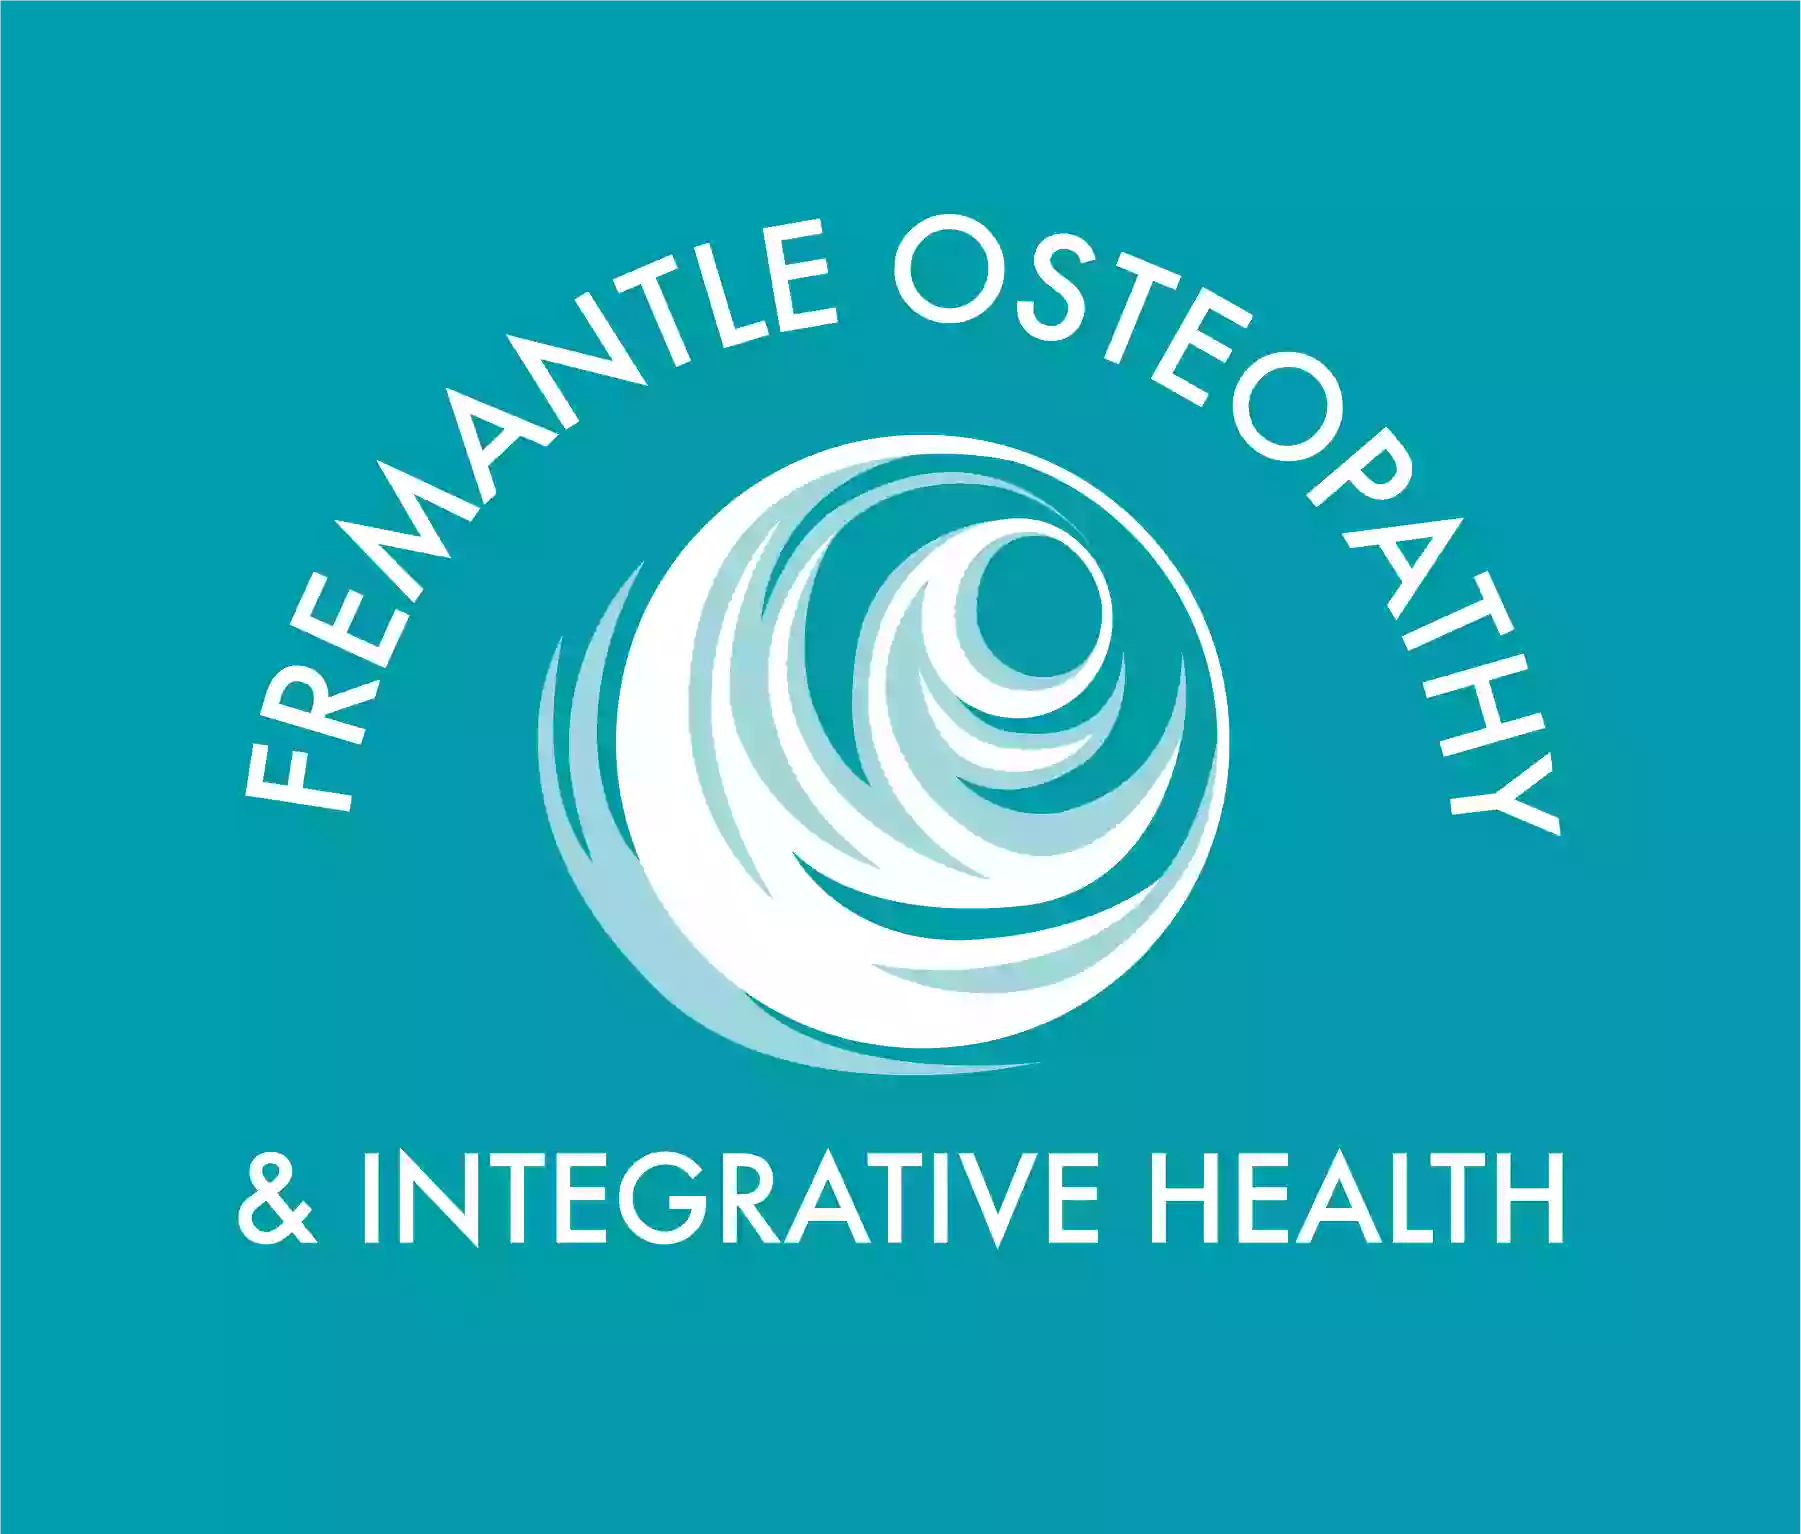 Fremantle Osteopathy and Integrative Health